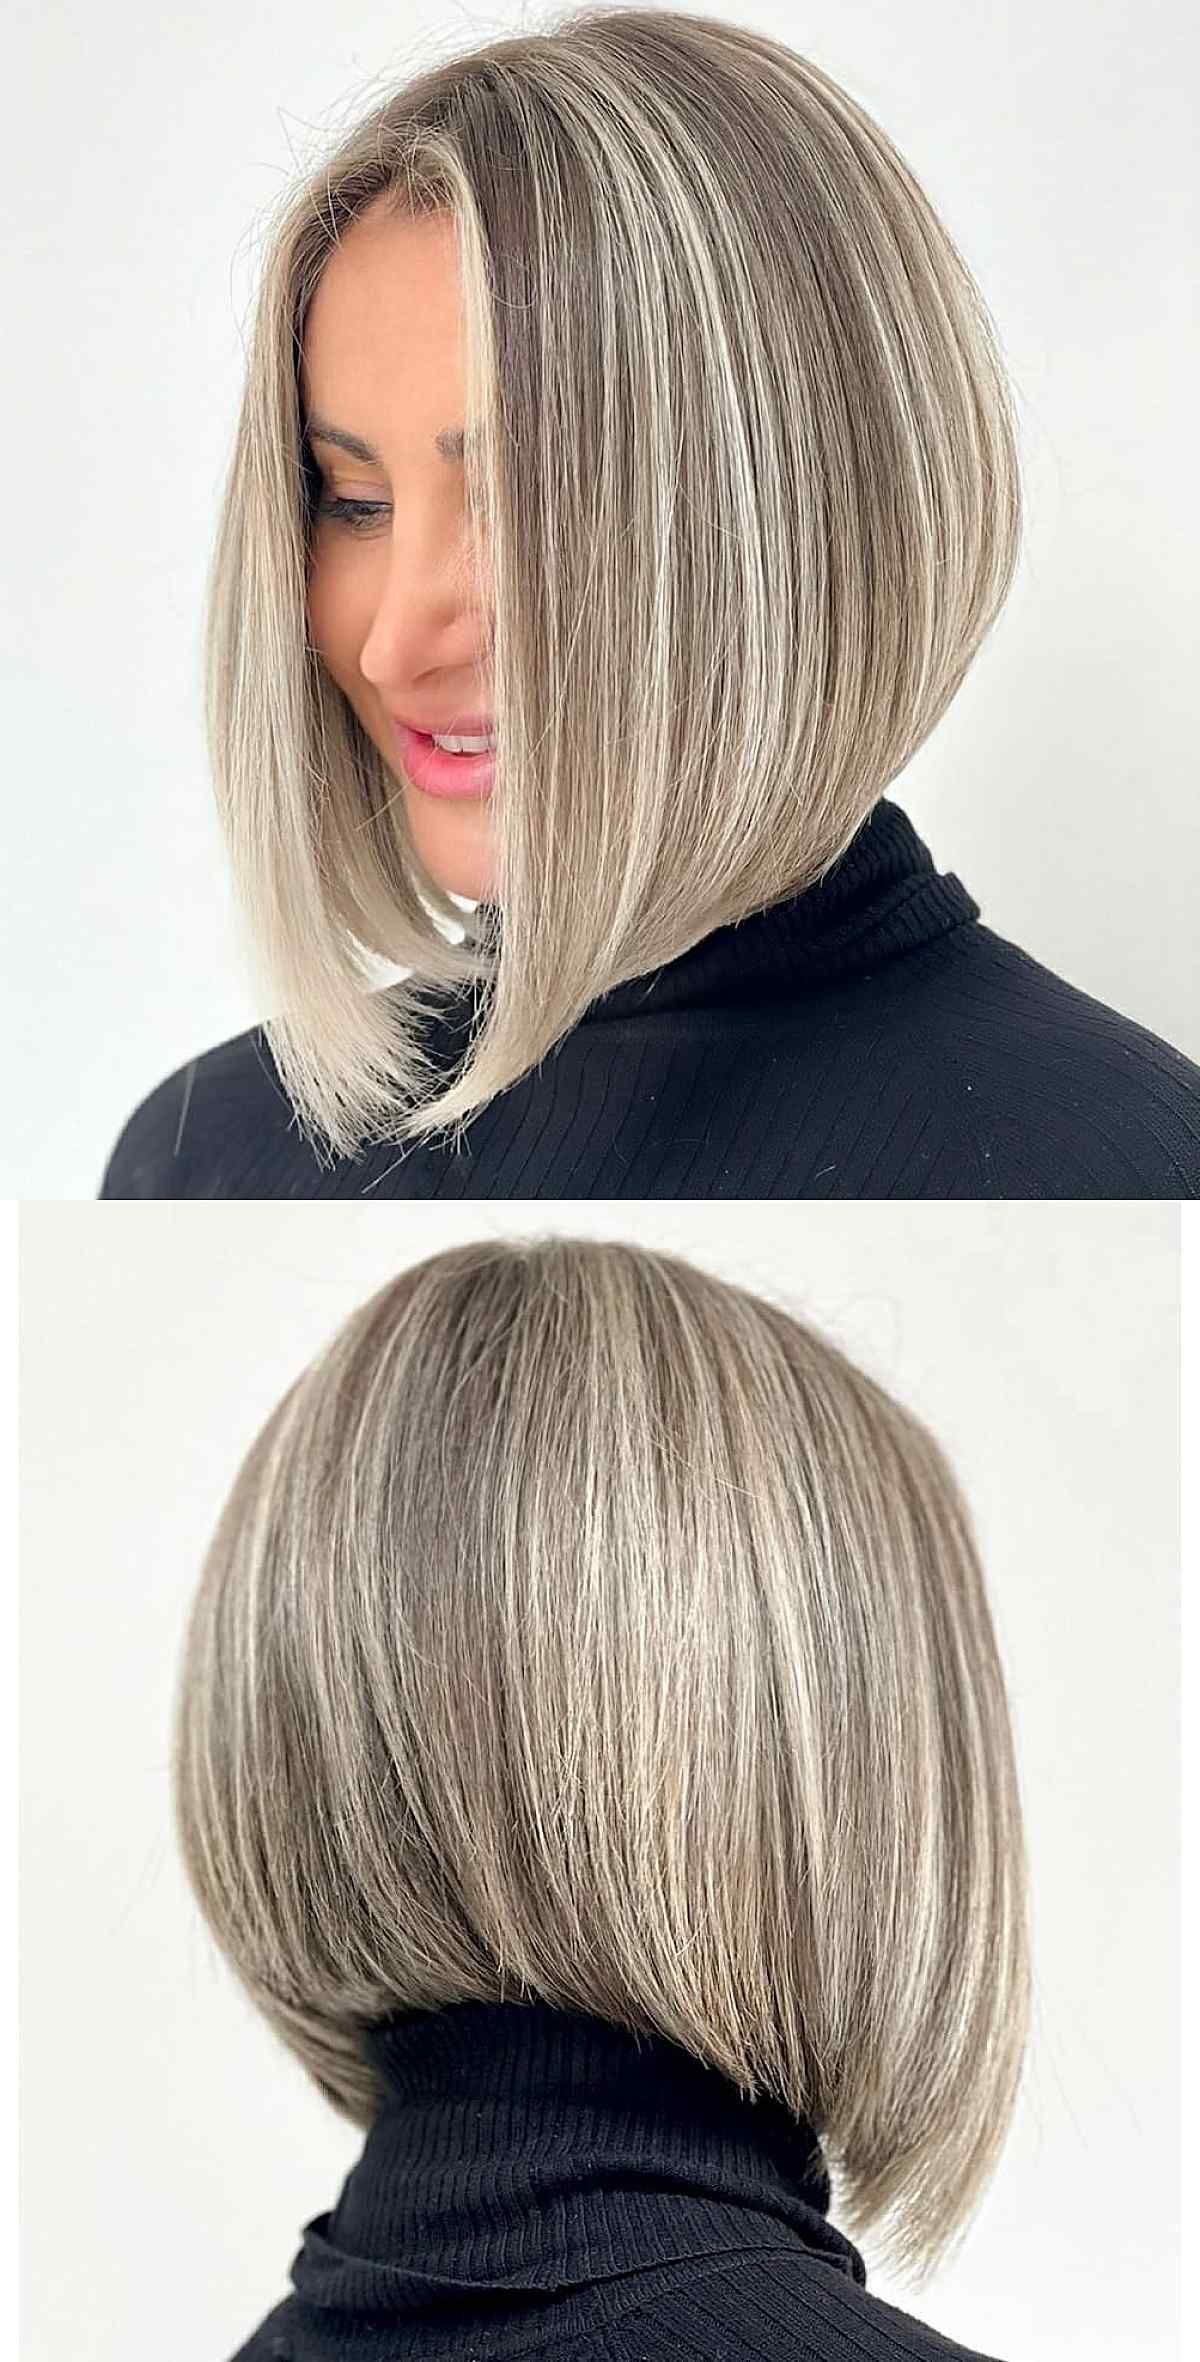 34 Hottest A Line Bob Haircuts You'll Want To Try In 2022 Pertaining To Best And Newest A Line Bob Haircuts (View 1 of 25)